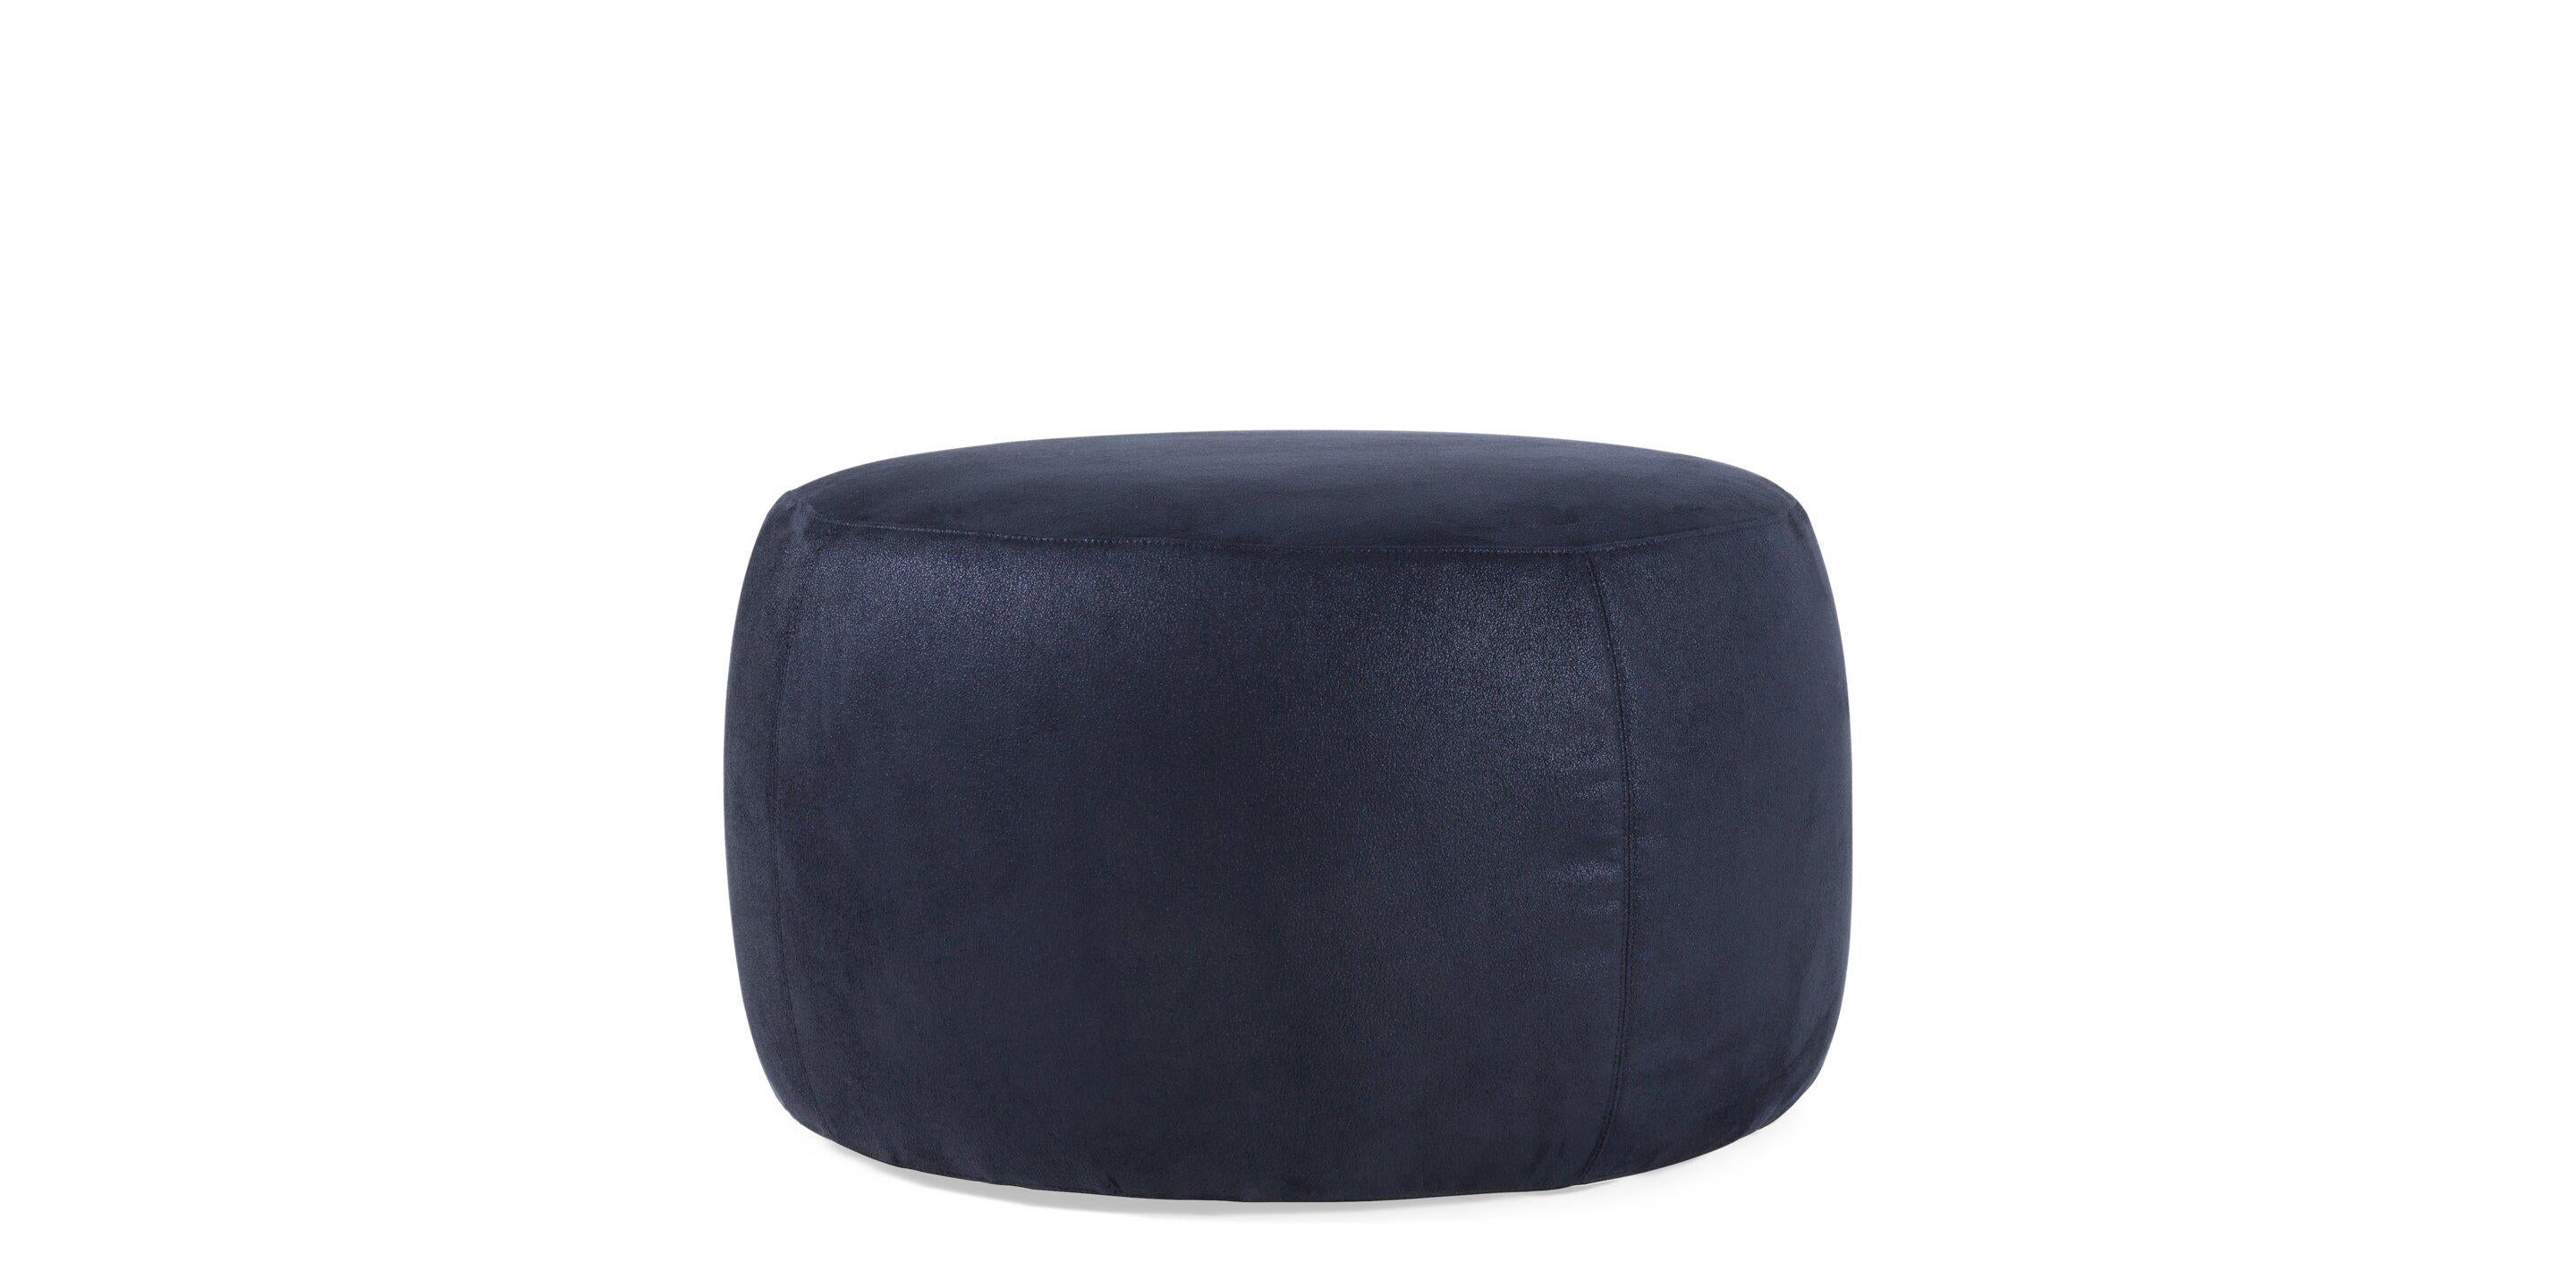 Modern Moooi Pooof Small Pouf in Abbracci, Black Upholstery For Sale